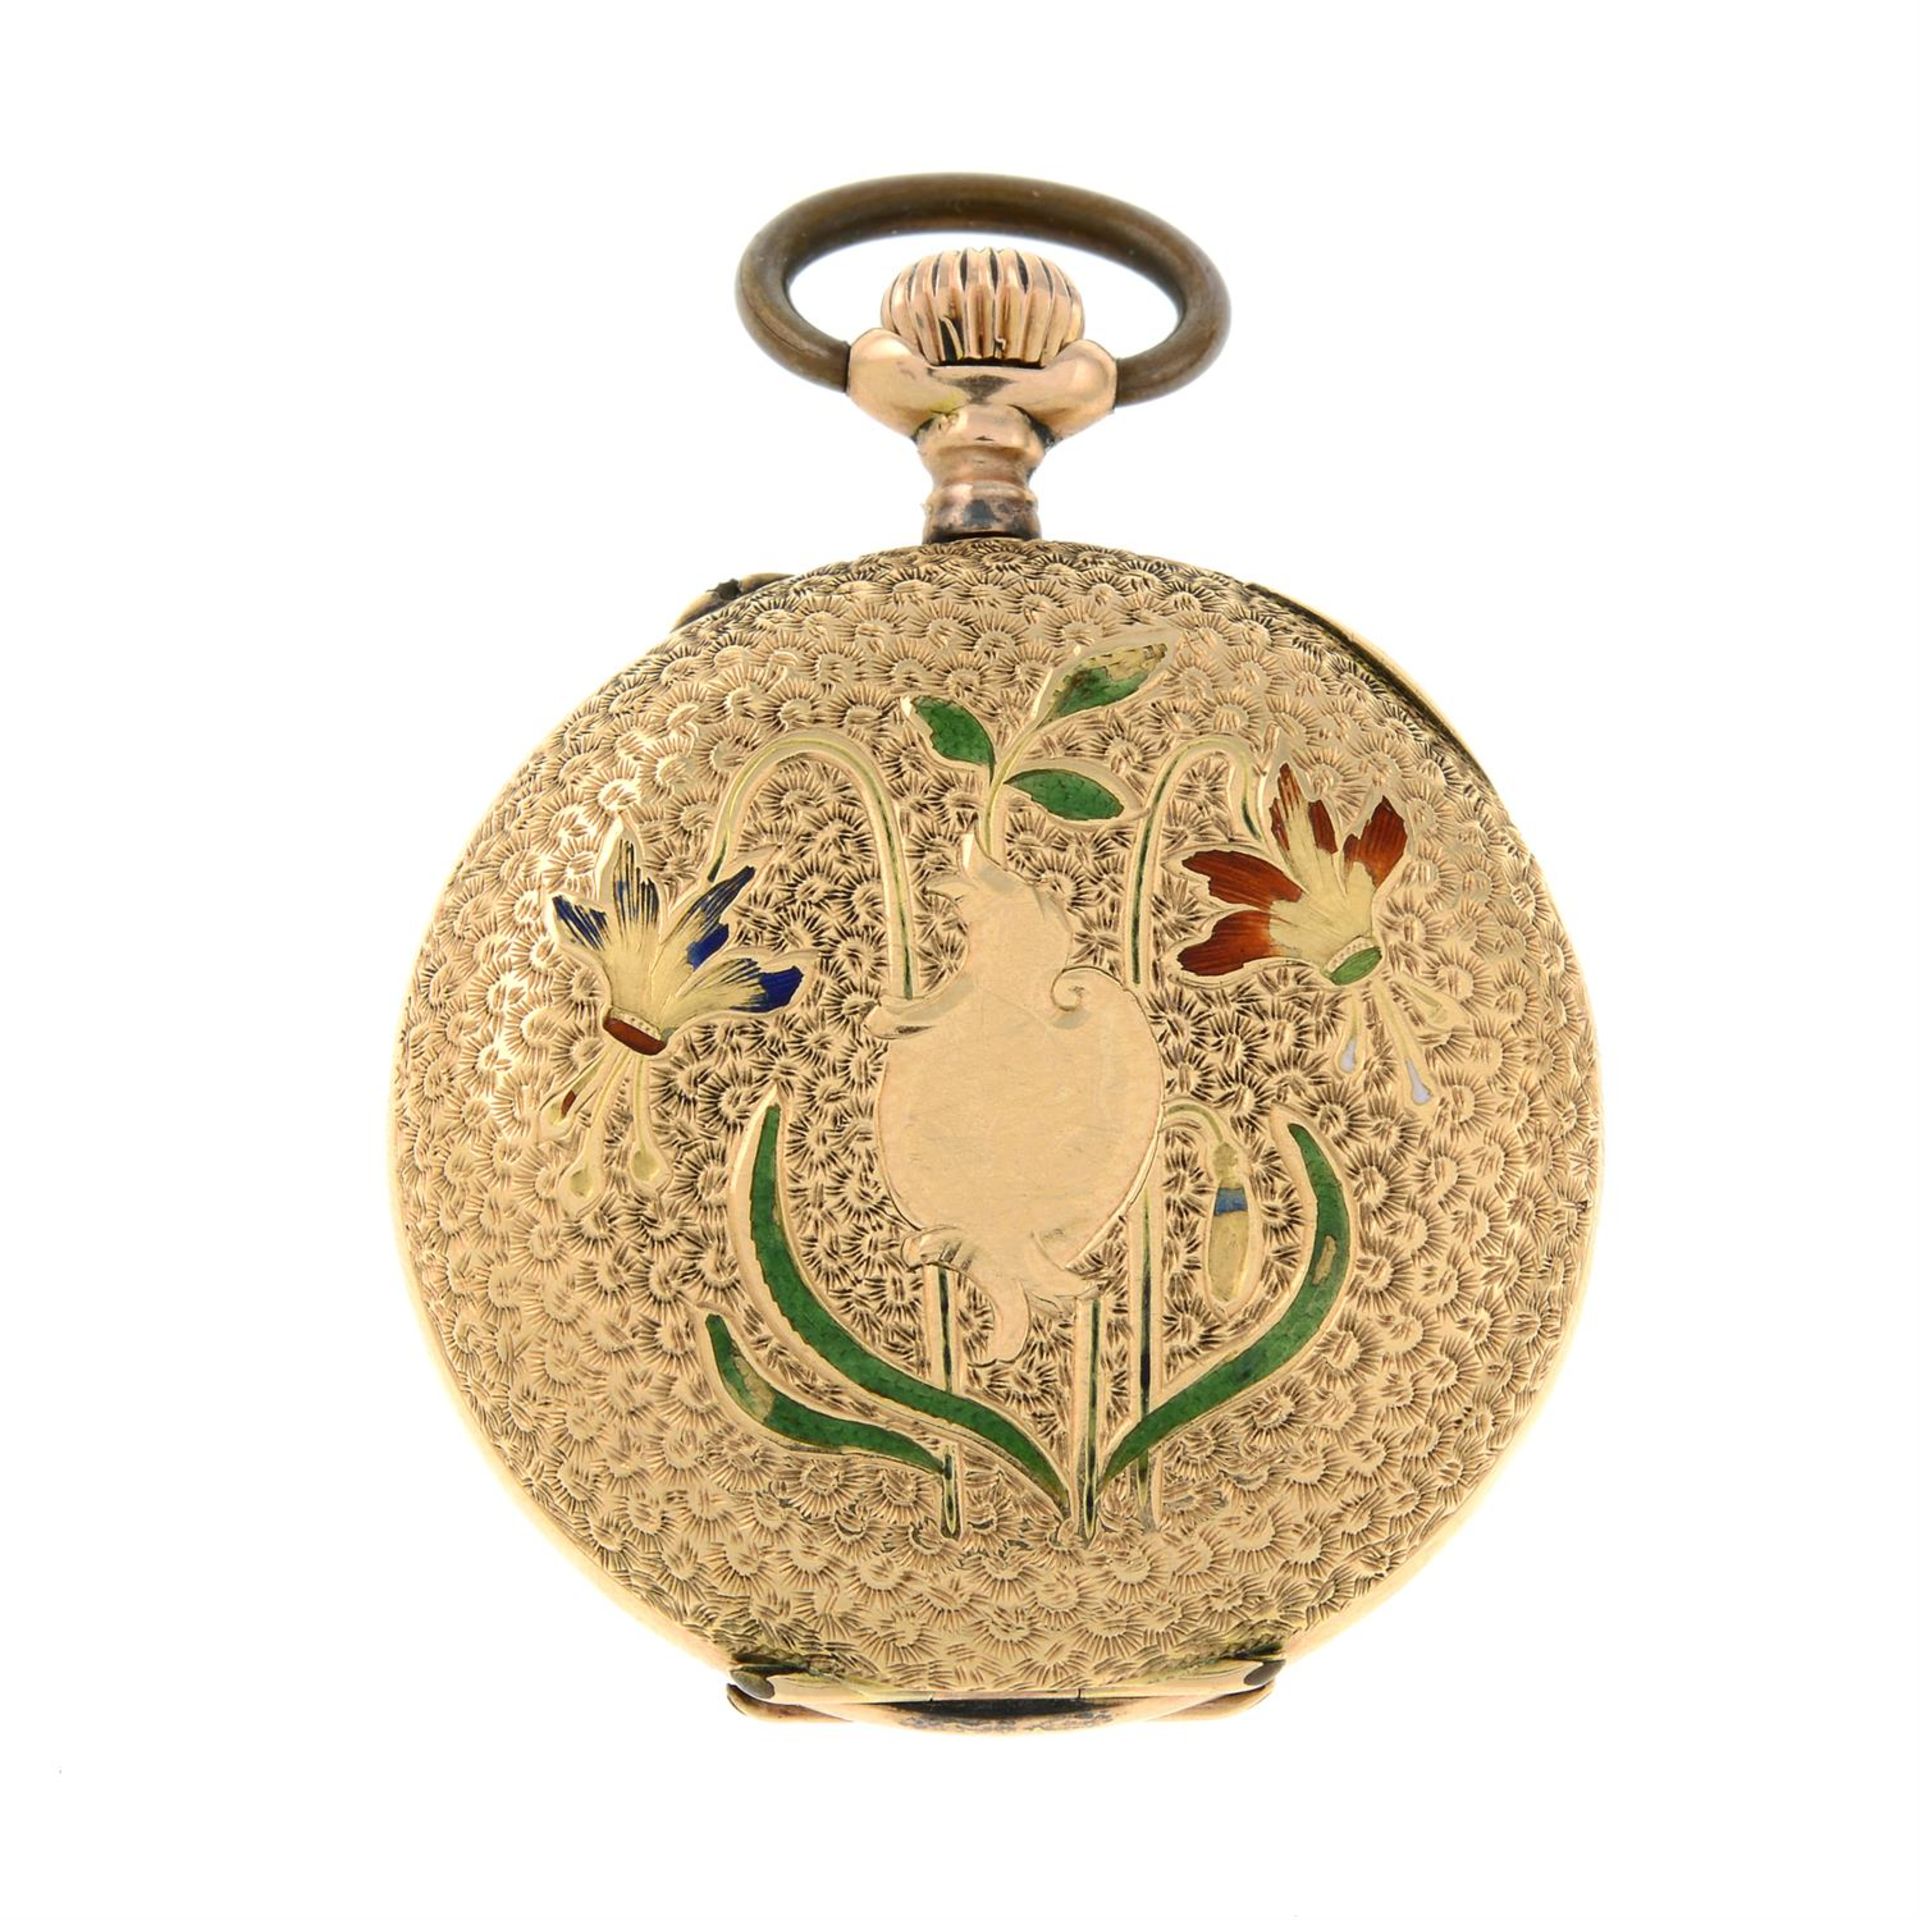 A 14ct gold Lady's pocket watch, with floral enamel reverse.